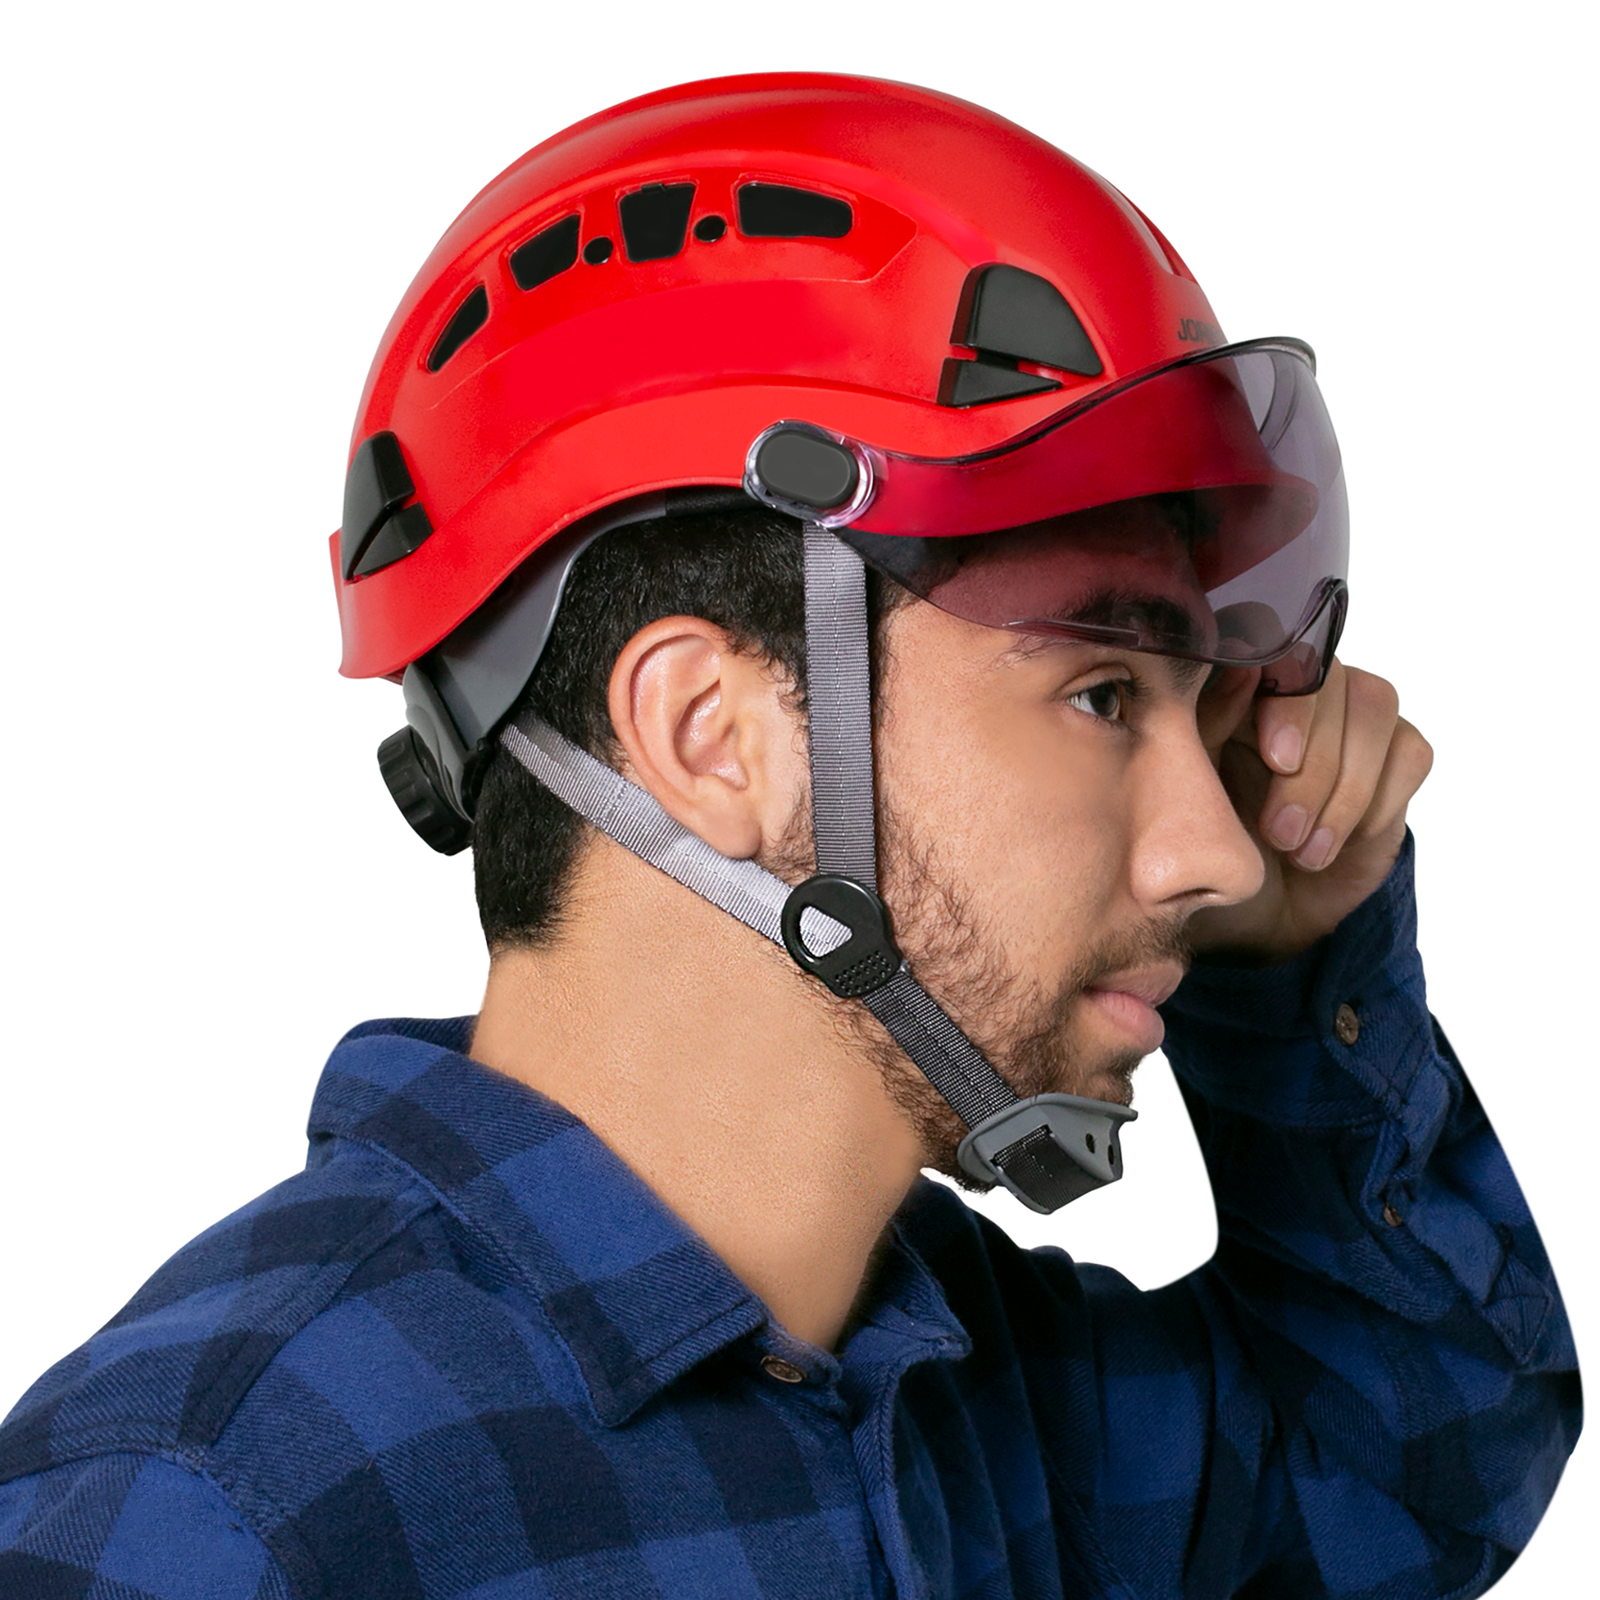 Man wearing a red hard hat with a JORESTECH® smoke eye shield installed on the hard hat, The man is pulling the eye shield upwards away from his face